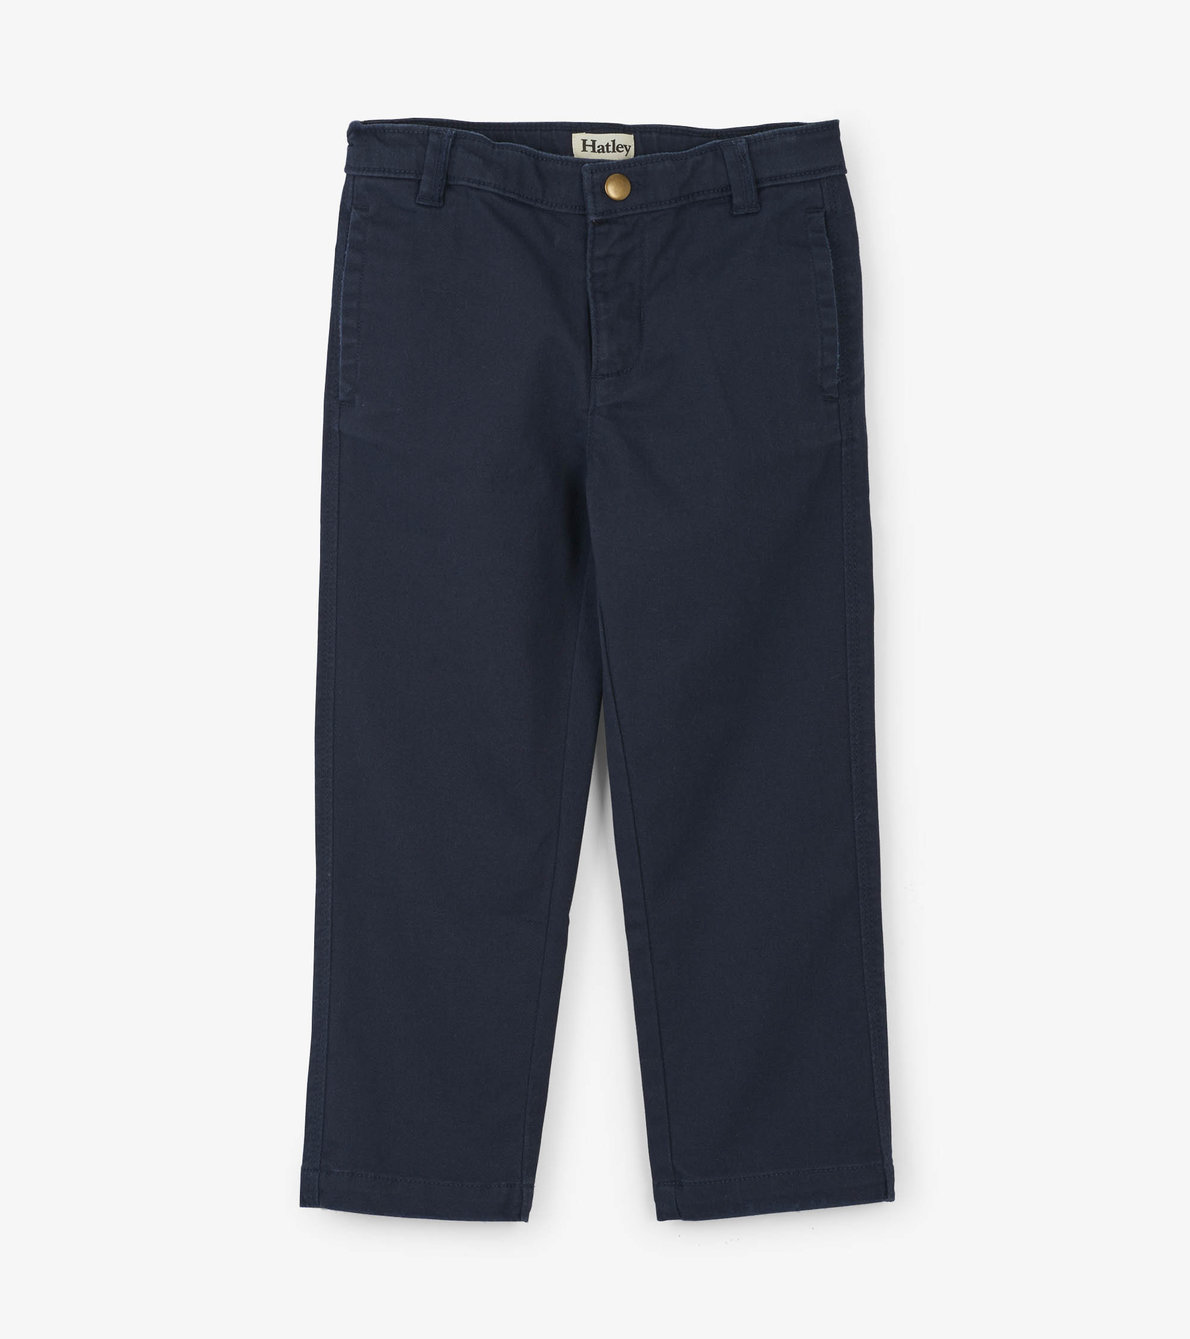 View larger image of Navy Stretch Twill Pants